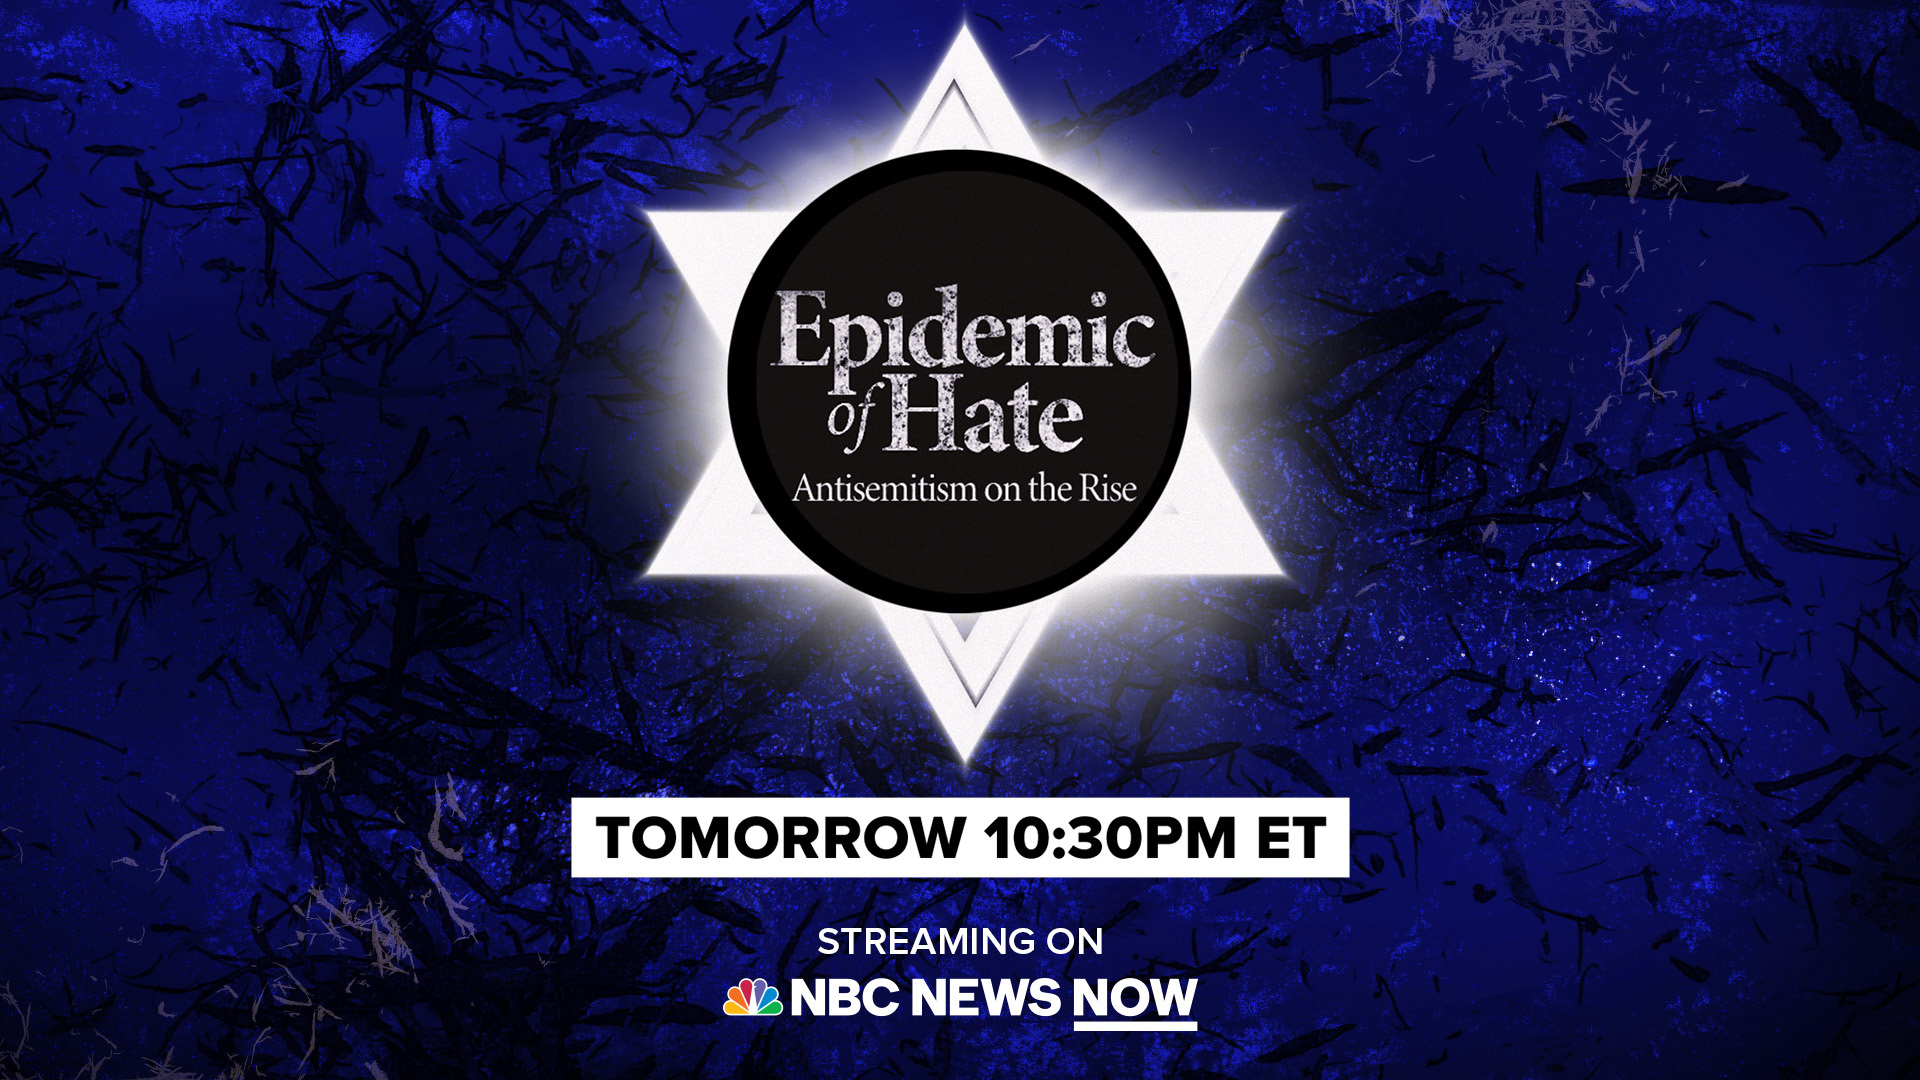 NBC NEWS NOW TO STREAM “EPIDEMIC OF HATE: ANTISEMITISM ON THE RISE” THURSDAY, NOV. 16 AT 10:30PM ET